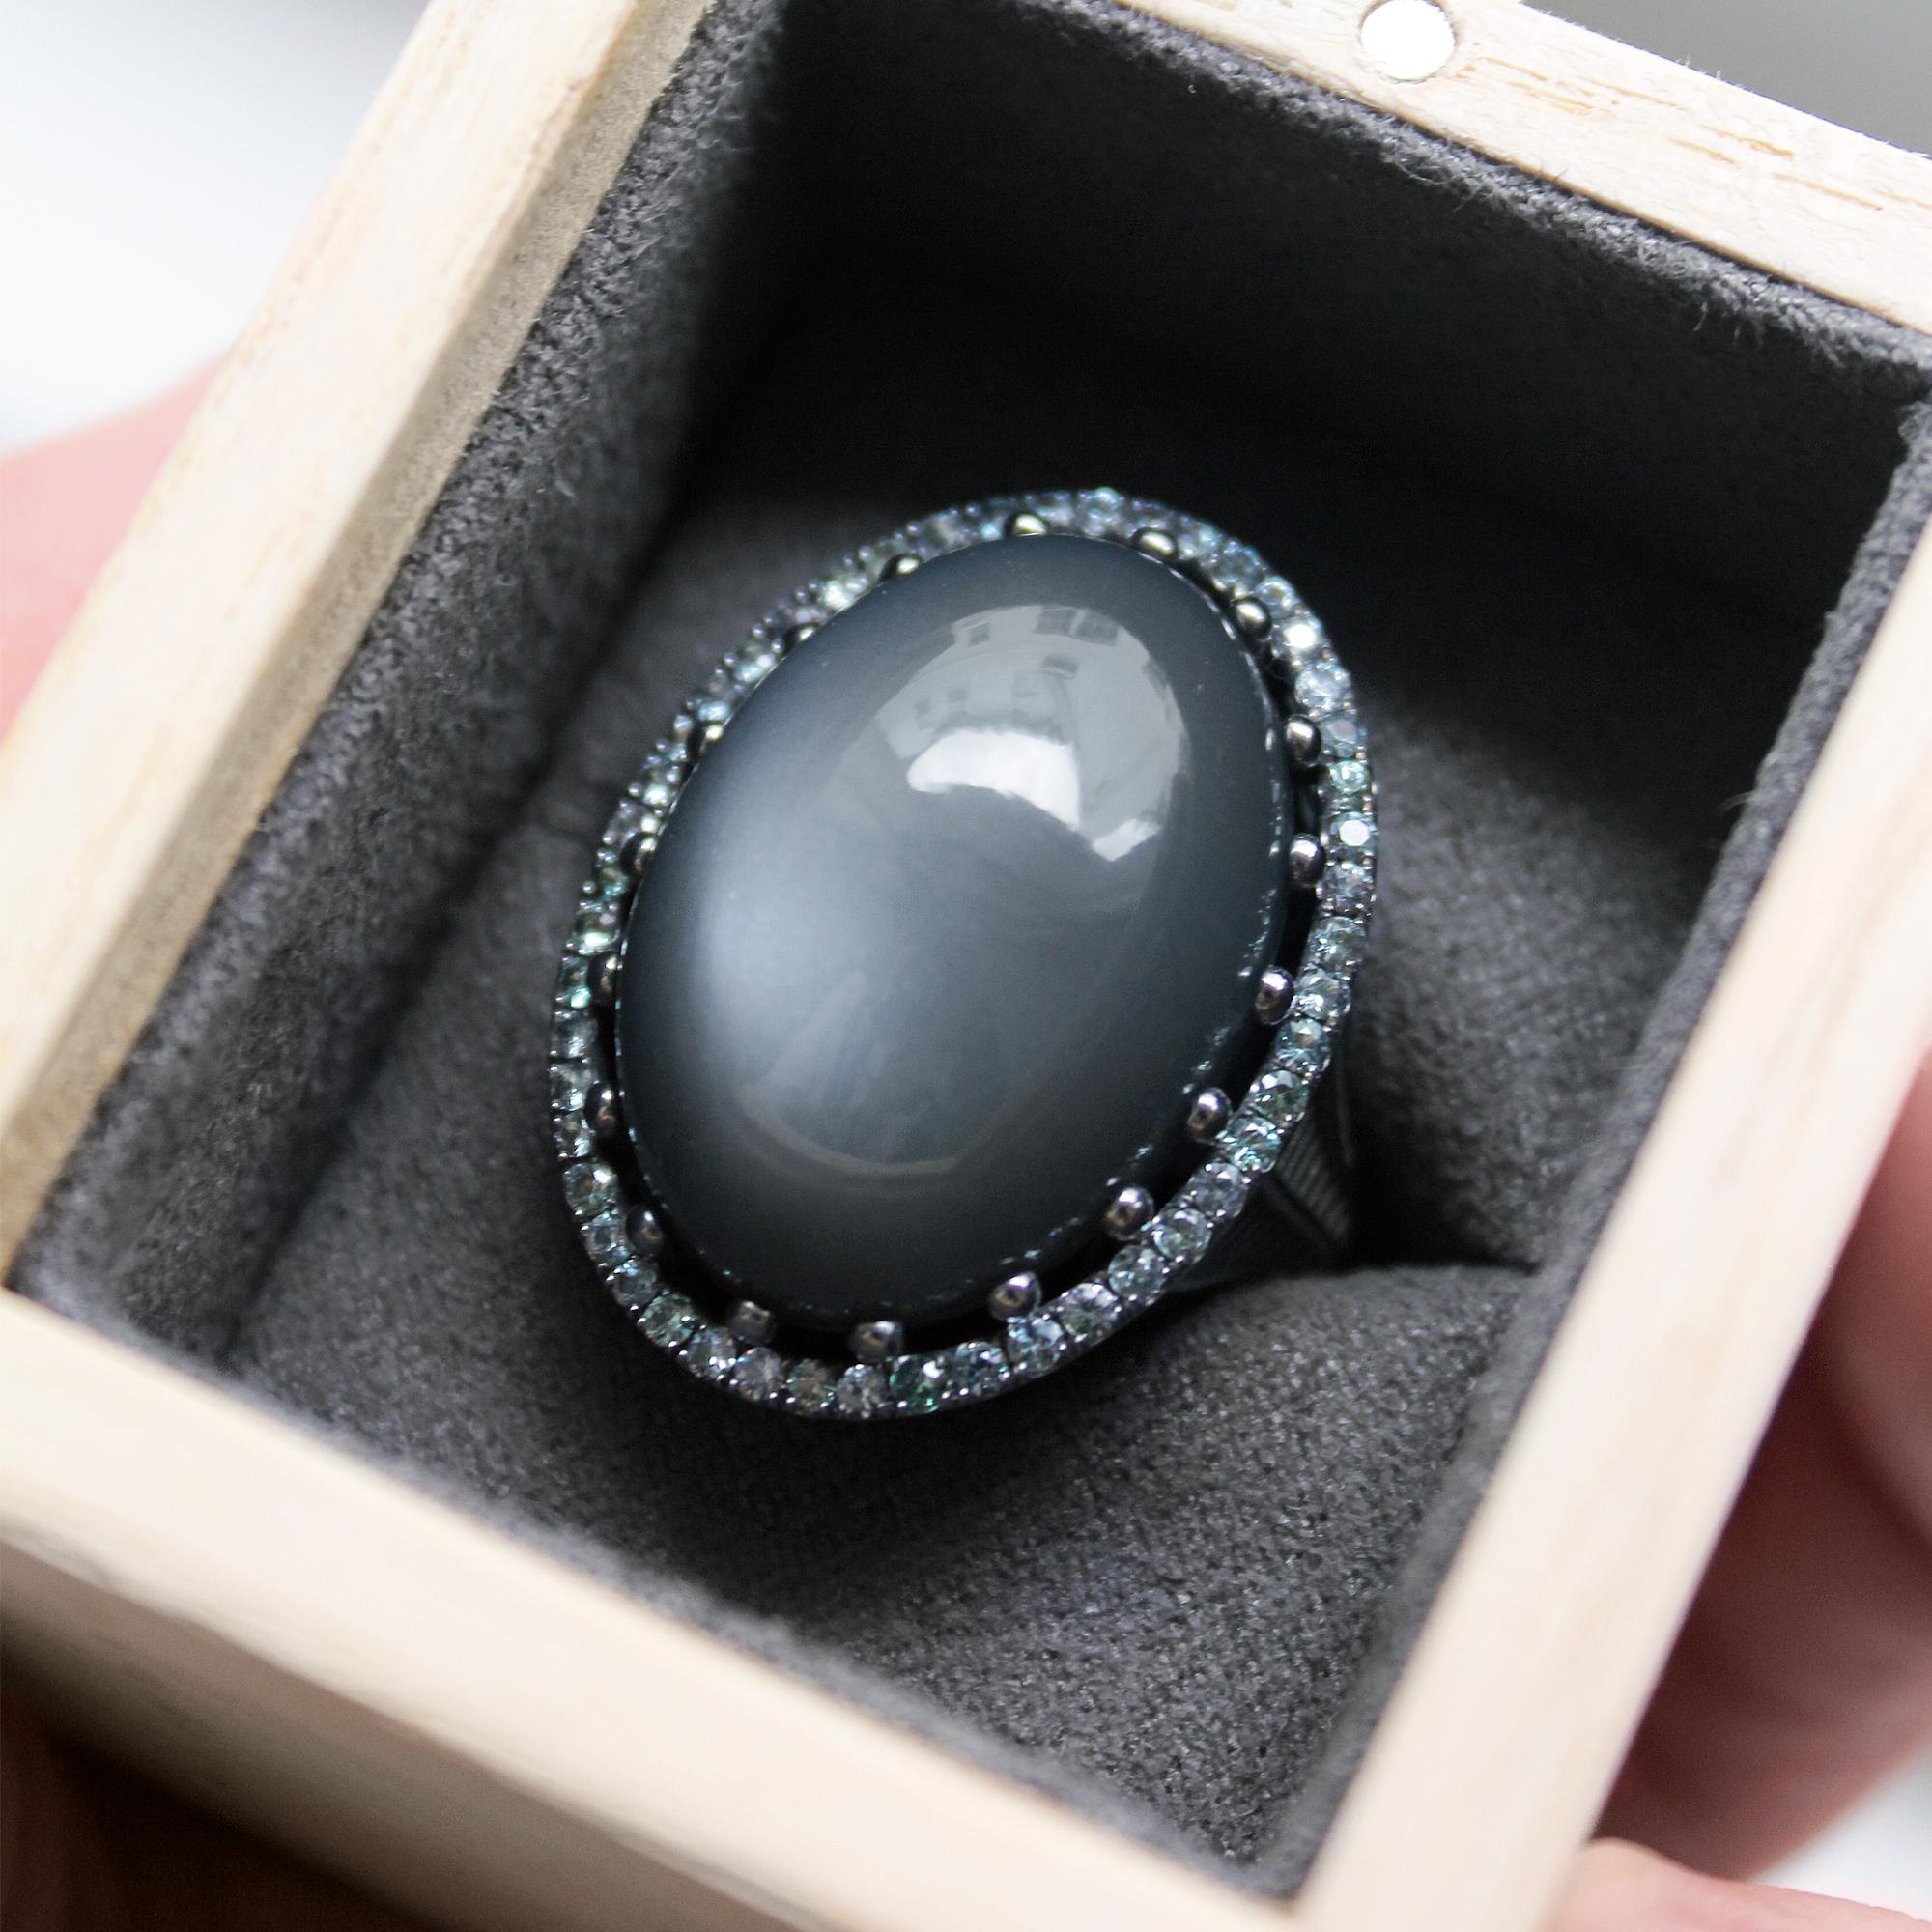 One of a Kind Cabochon Dome Cocktail Ring handmade by jewelry artist Roule and Co in matte-finished 18k black gold featuring a 35.92 carat glowing gray moonstone set in polished black gold ball prongs and surrounded by 0.91 total carats of